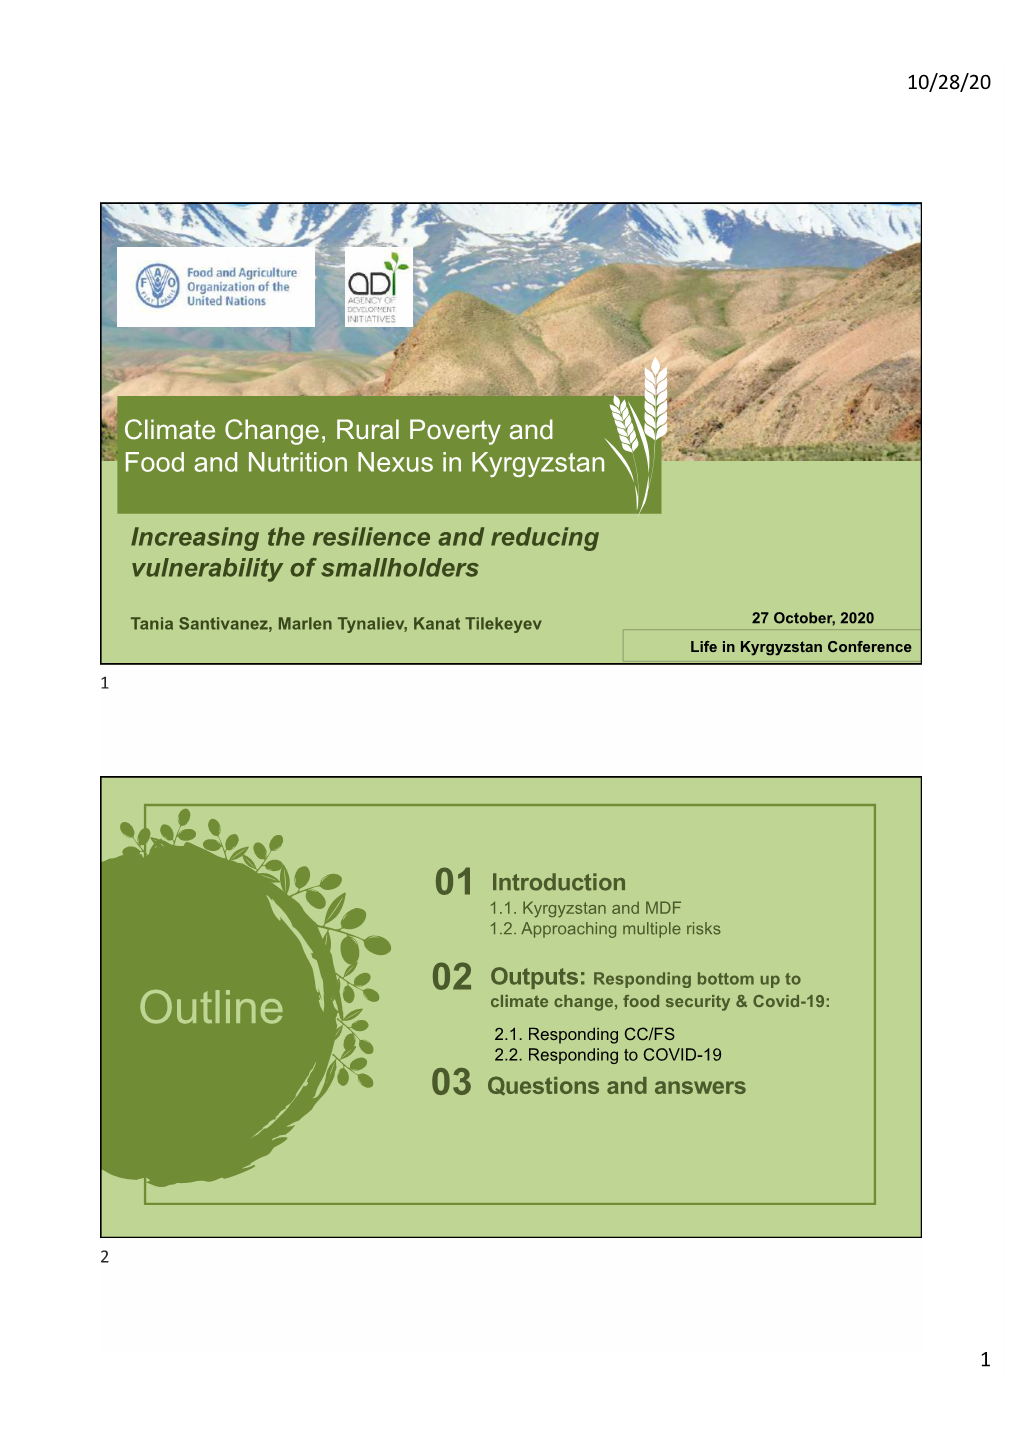 Outline Climate Change, Food Security & Covid-19: 2.1